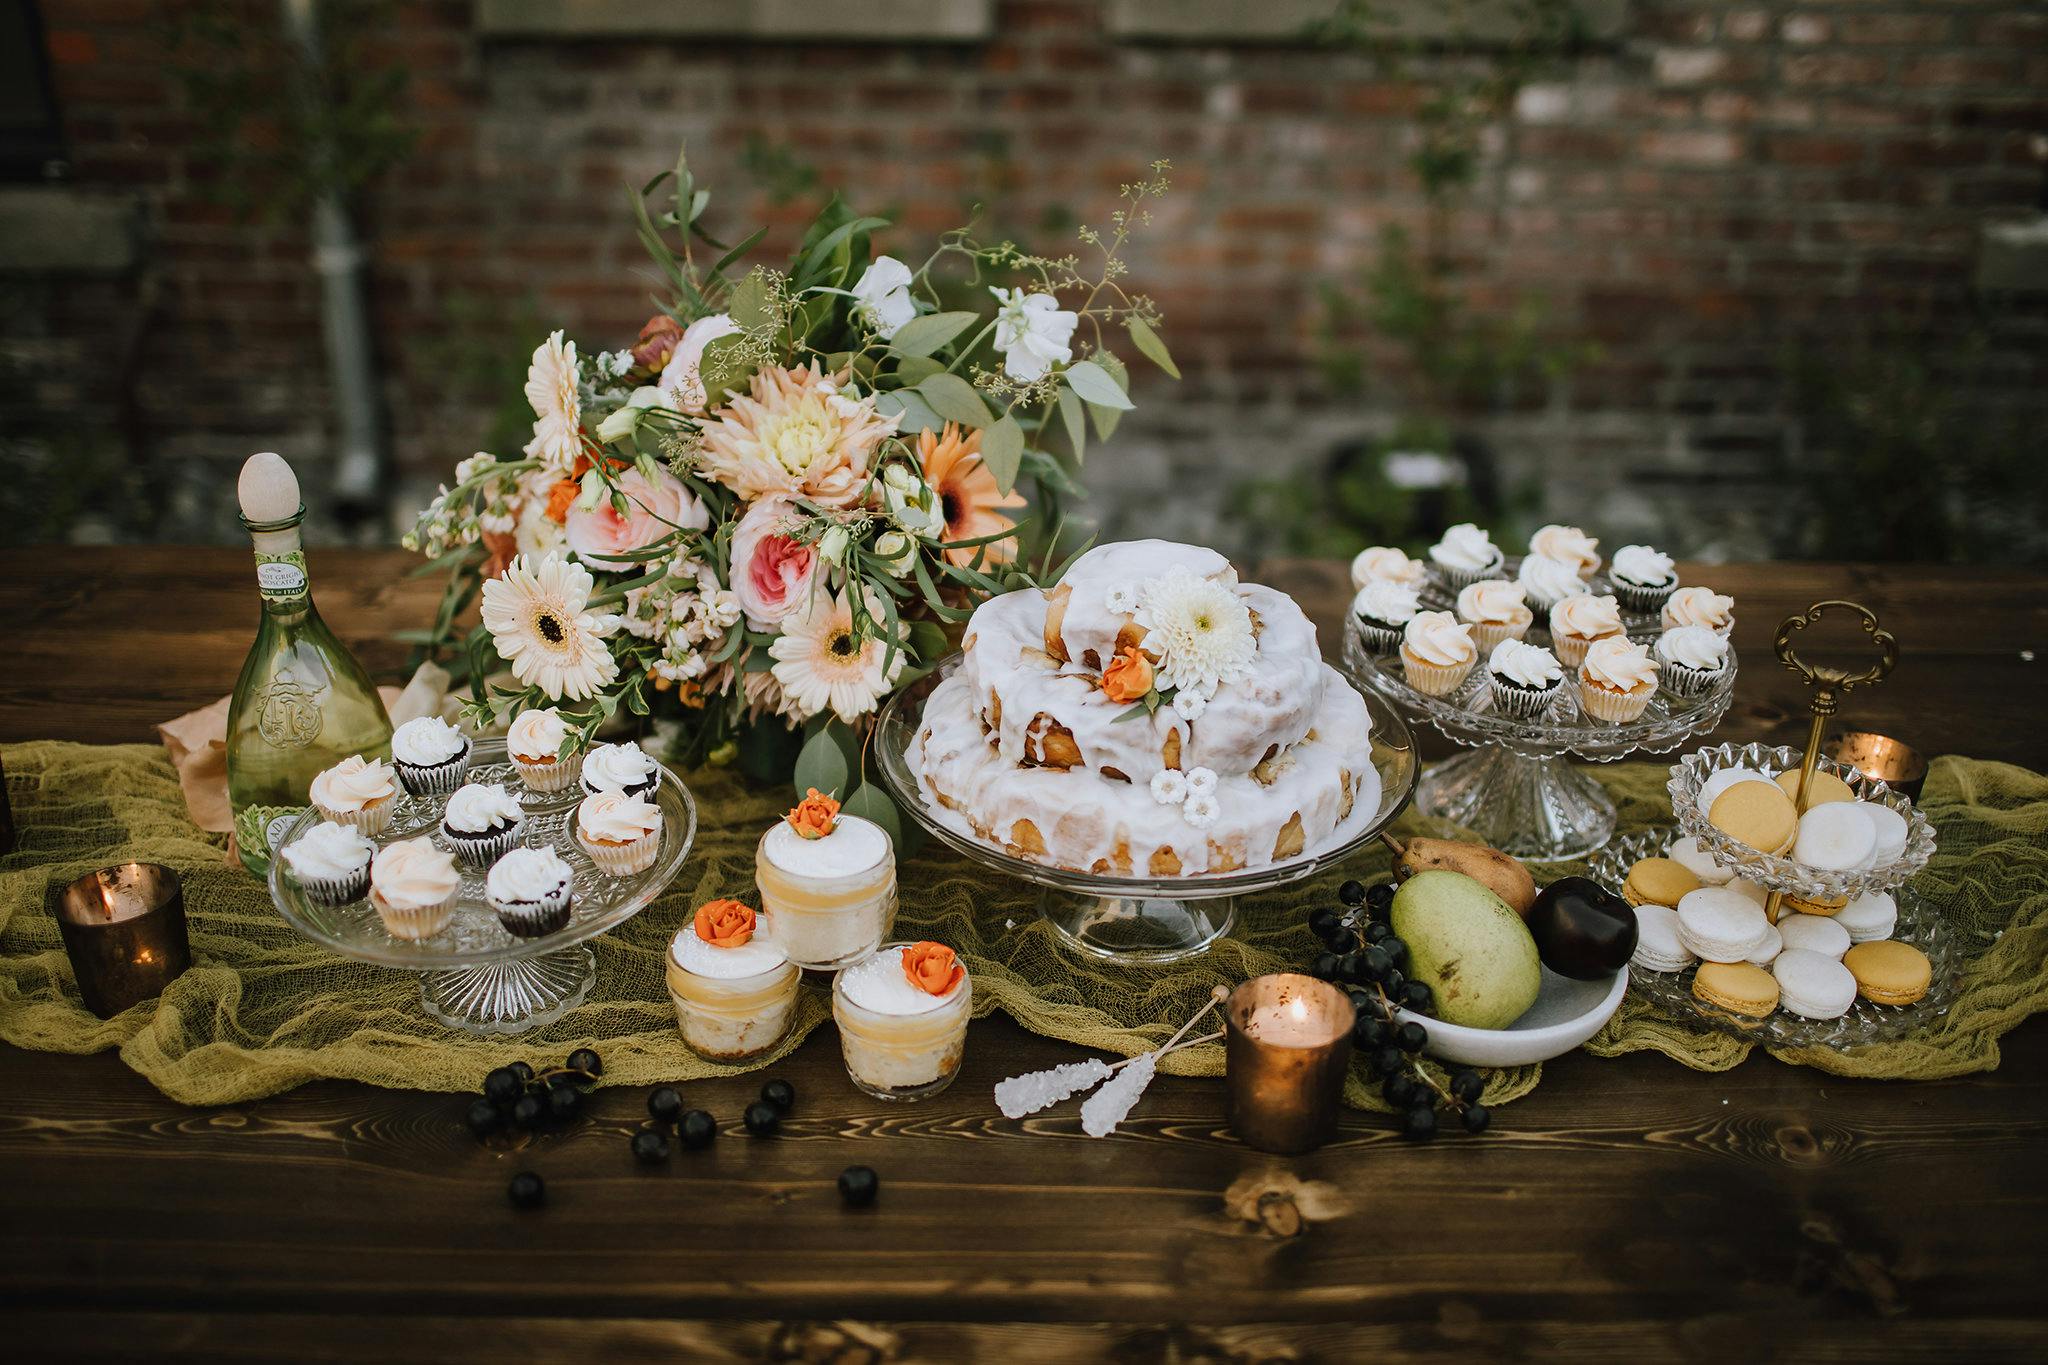 Delicious dessert table spread with flowers